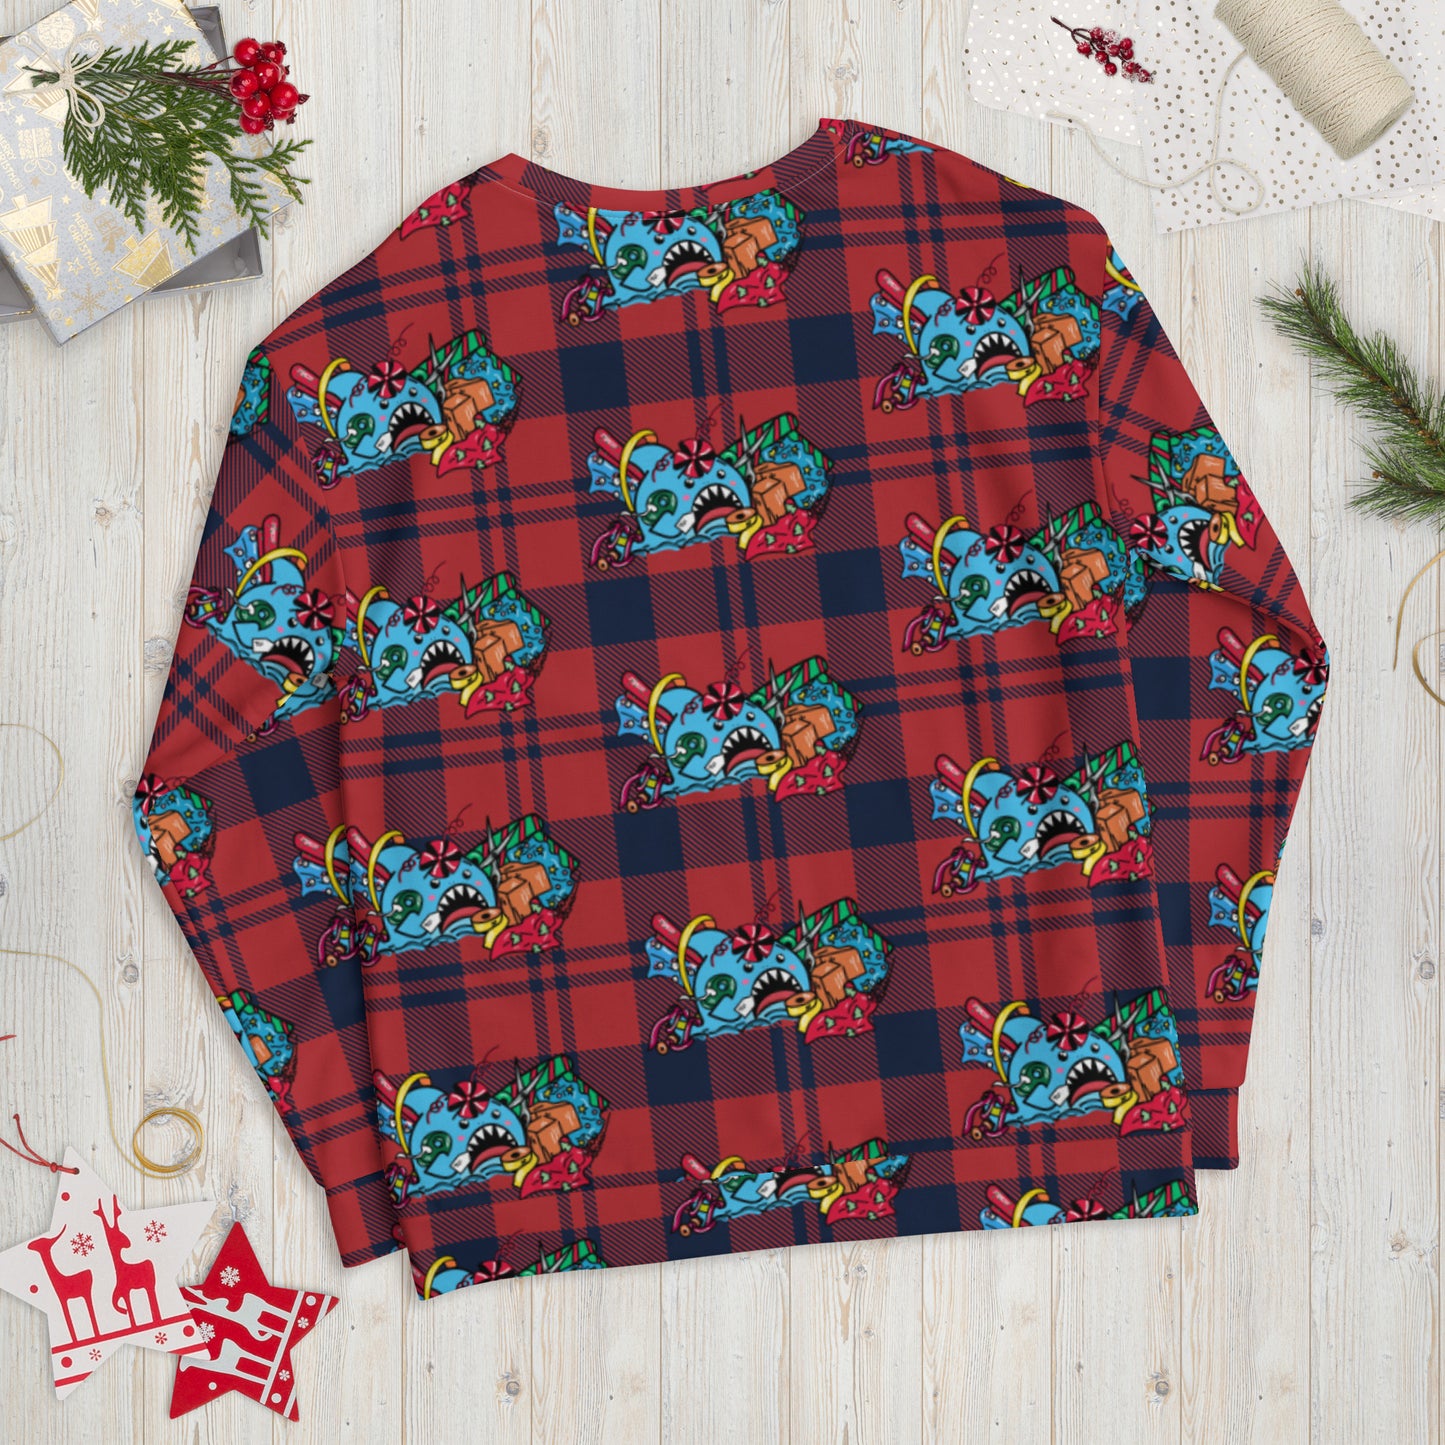 Holiday Sharks Ugly Christmas Sweater- Time to Wrap the Gifts! (Genderless sweatshirt)